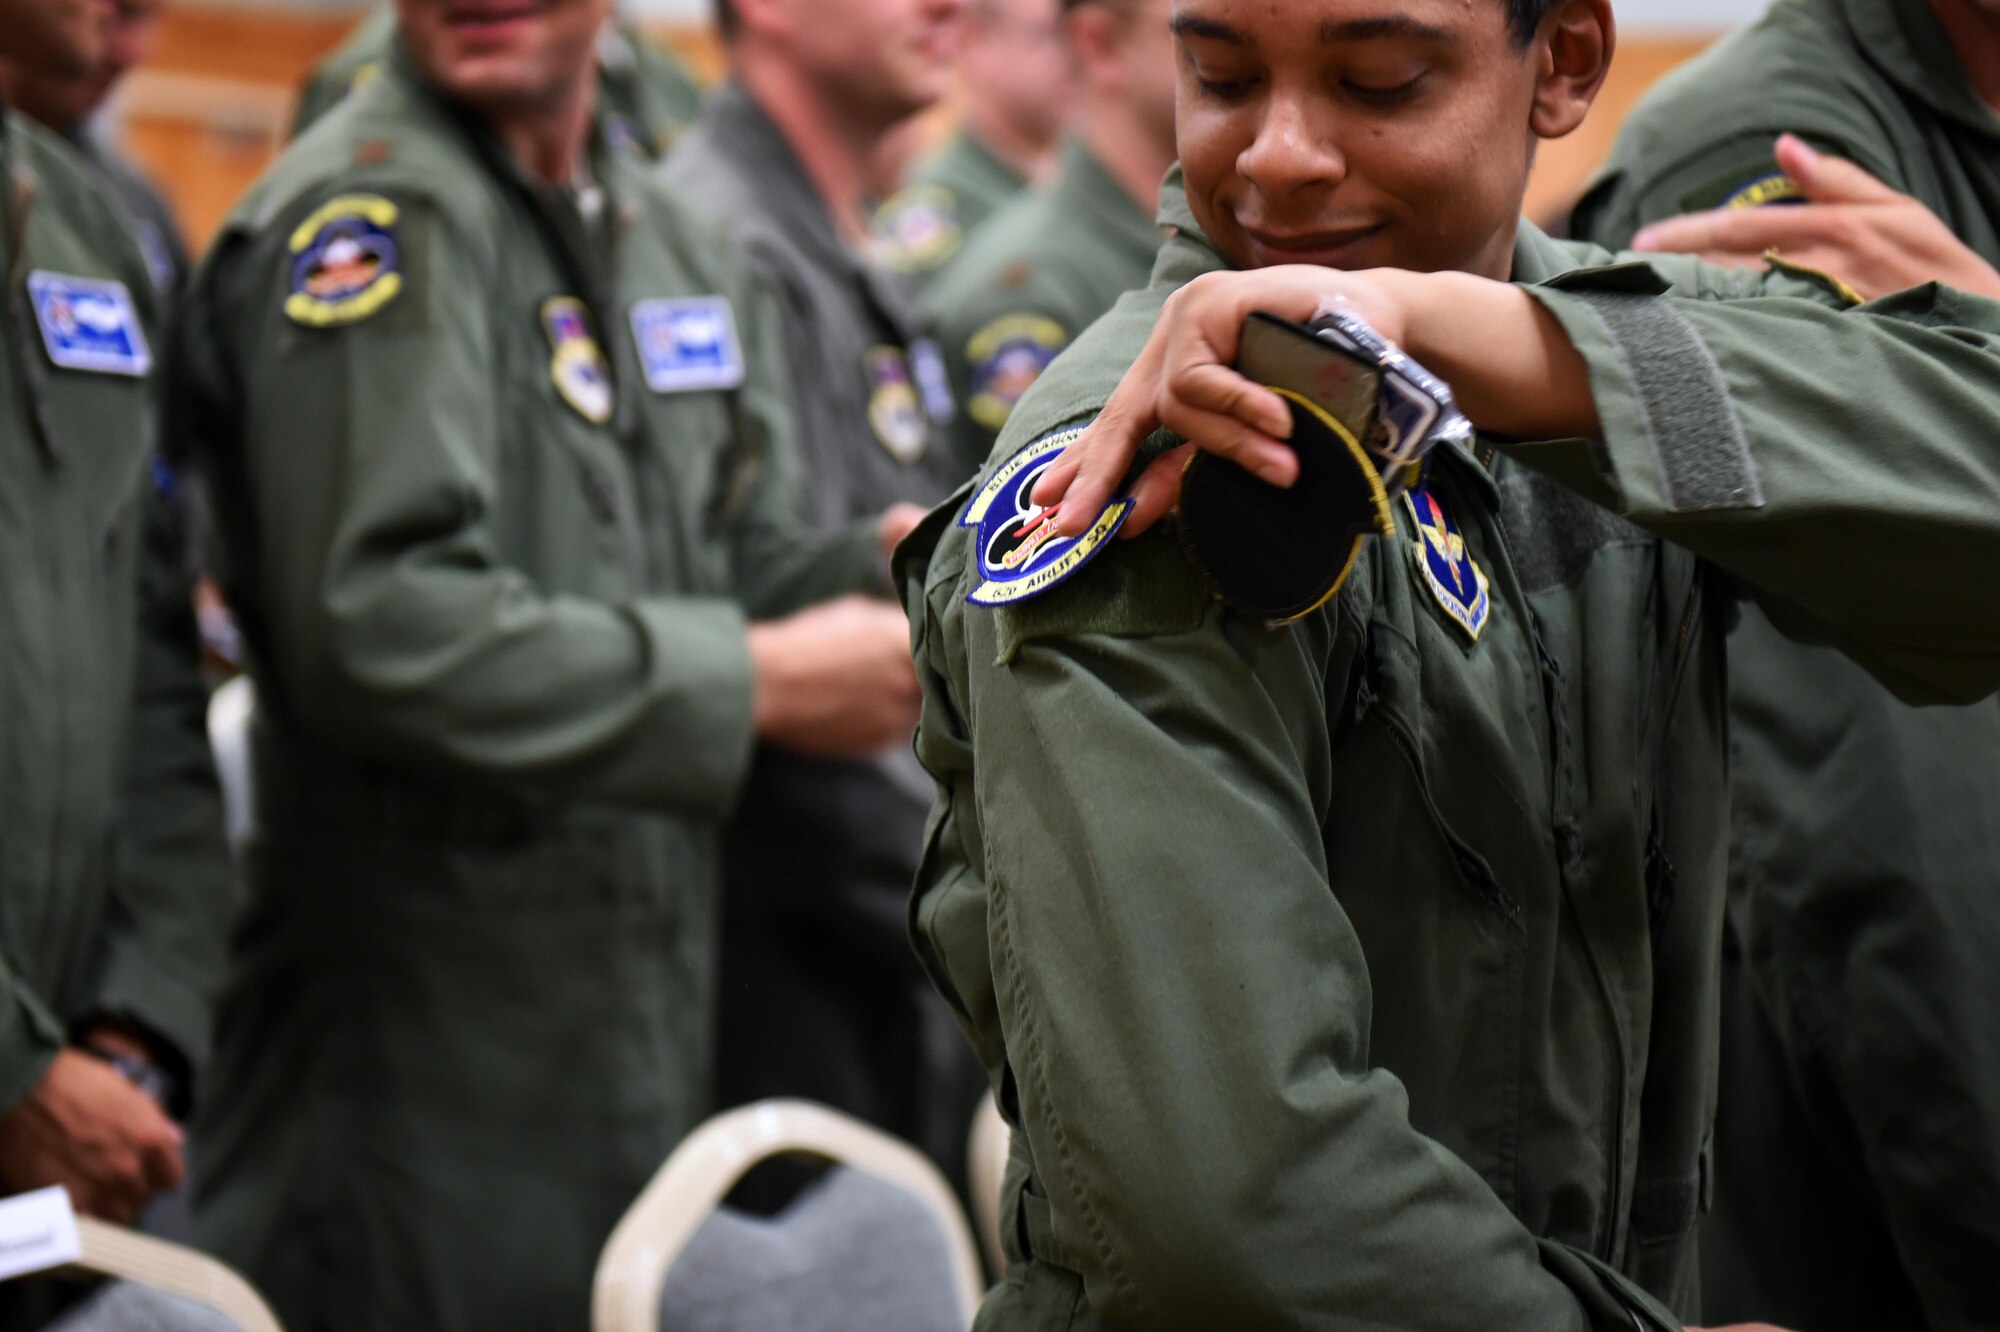 U.S. Air Force Staff Sgt. Terrence Greene, 62nd Airlift Squadron loadmaster instructor, places a new 62nd AS patch on his flight suit during the 48th Airlift Squadron transition ceremony Sept. 30, 2016, at Little Rock Air Force Base, Ark. With the 314th Airlift Wing transitioning away from the C-130H model and being the sole providers of C-130J training, the 48th Airlift Squadron personnel have become members of the 62nd AS.